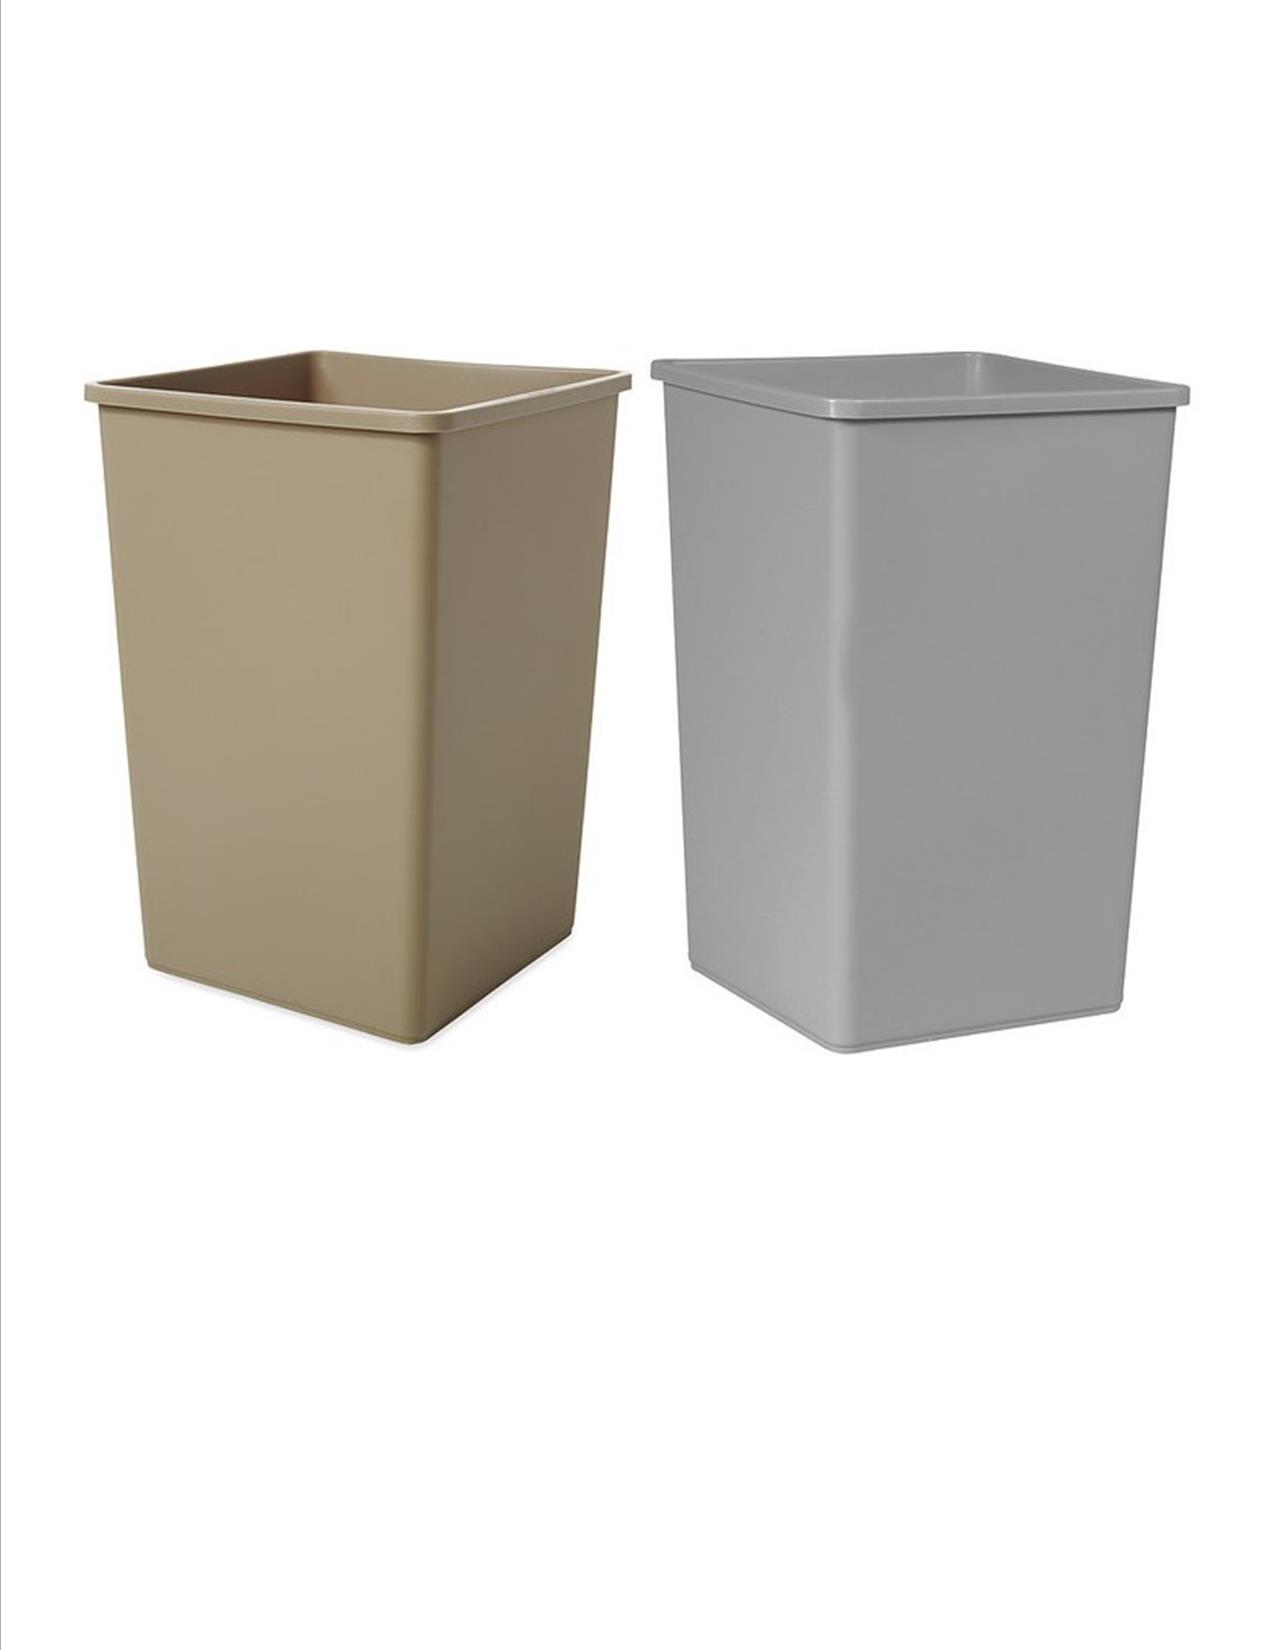 https://www.majorsupply.com/wp-content/uploads/2020/02/35-gal-containers.jpg